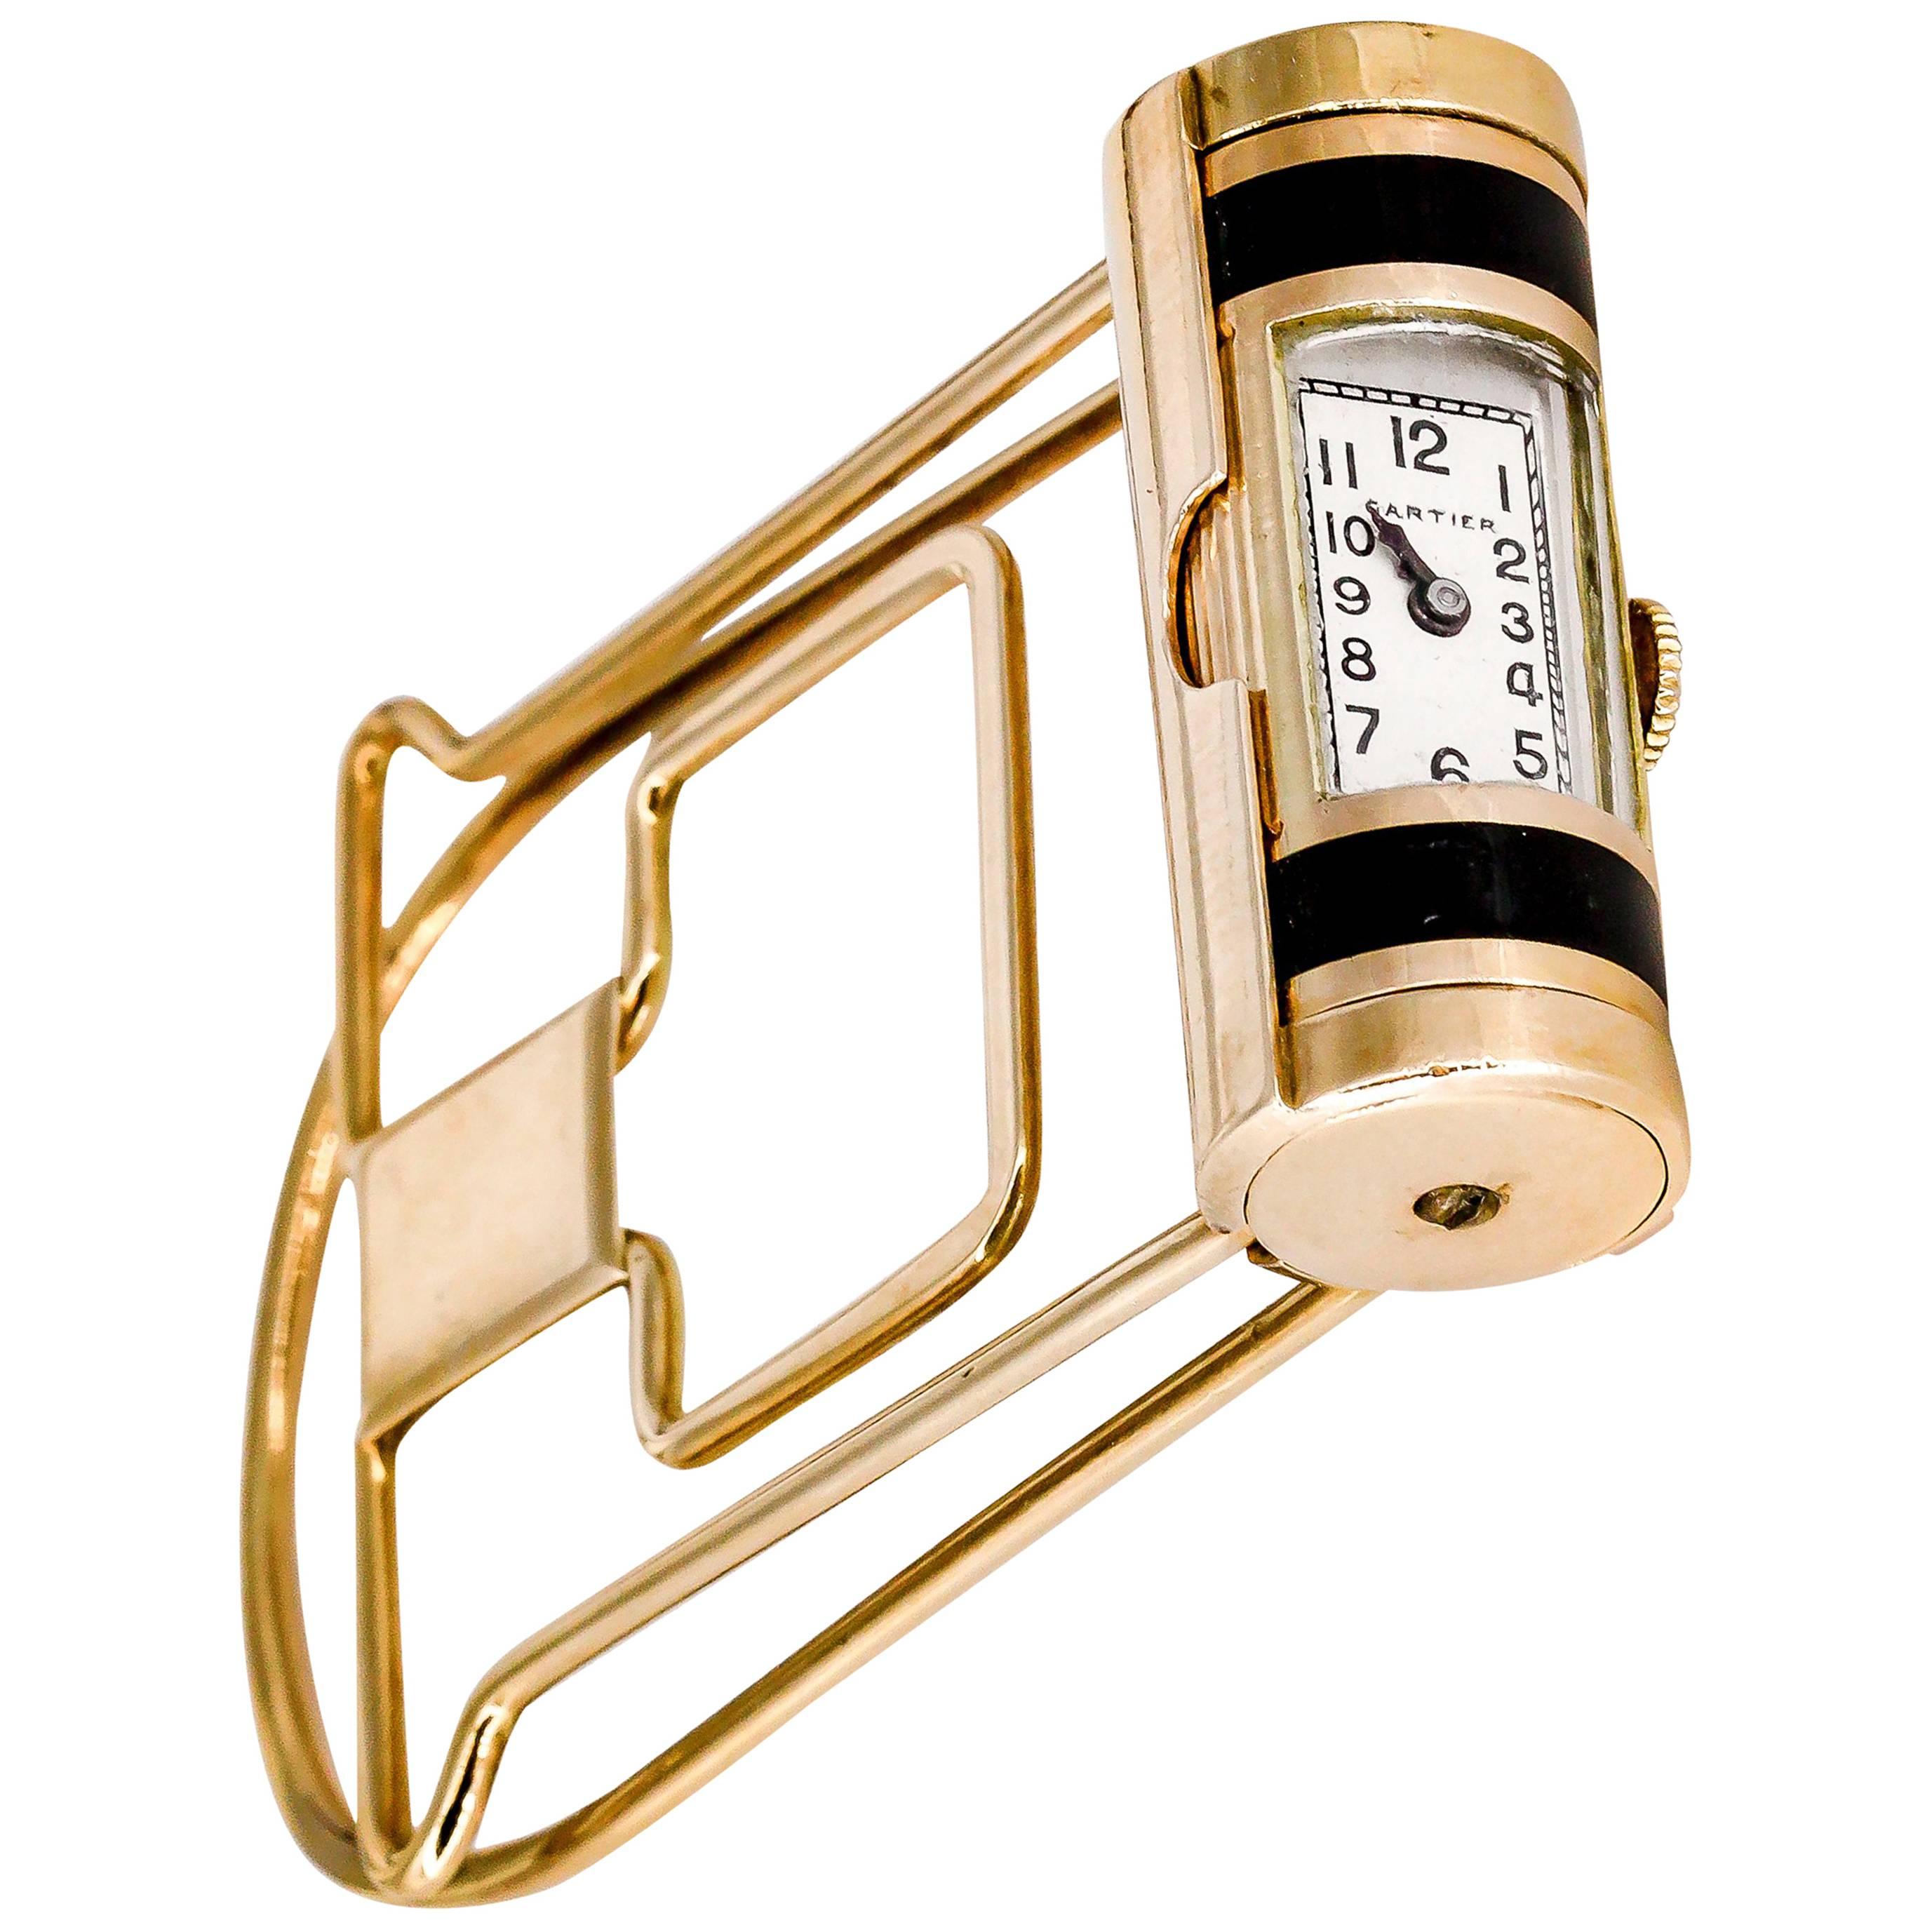 Cartier Yellow Gold Enamel Money Clip with Built-In Mechanical Watch